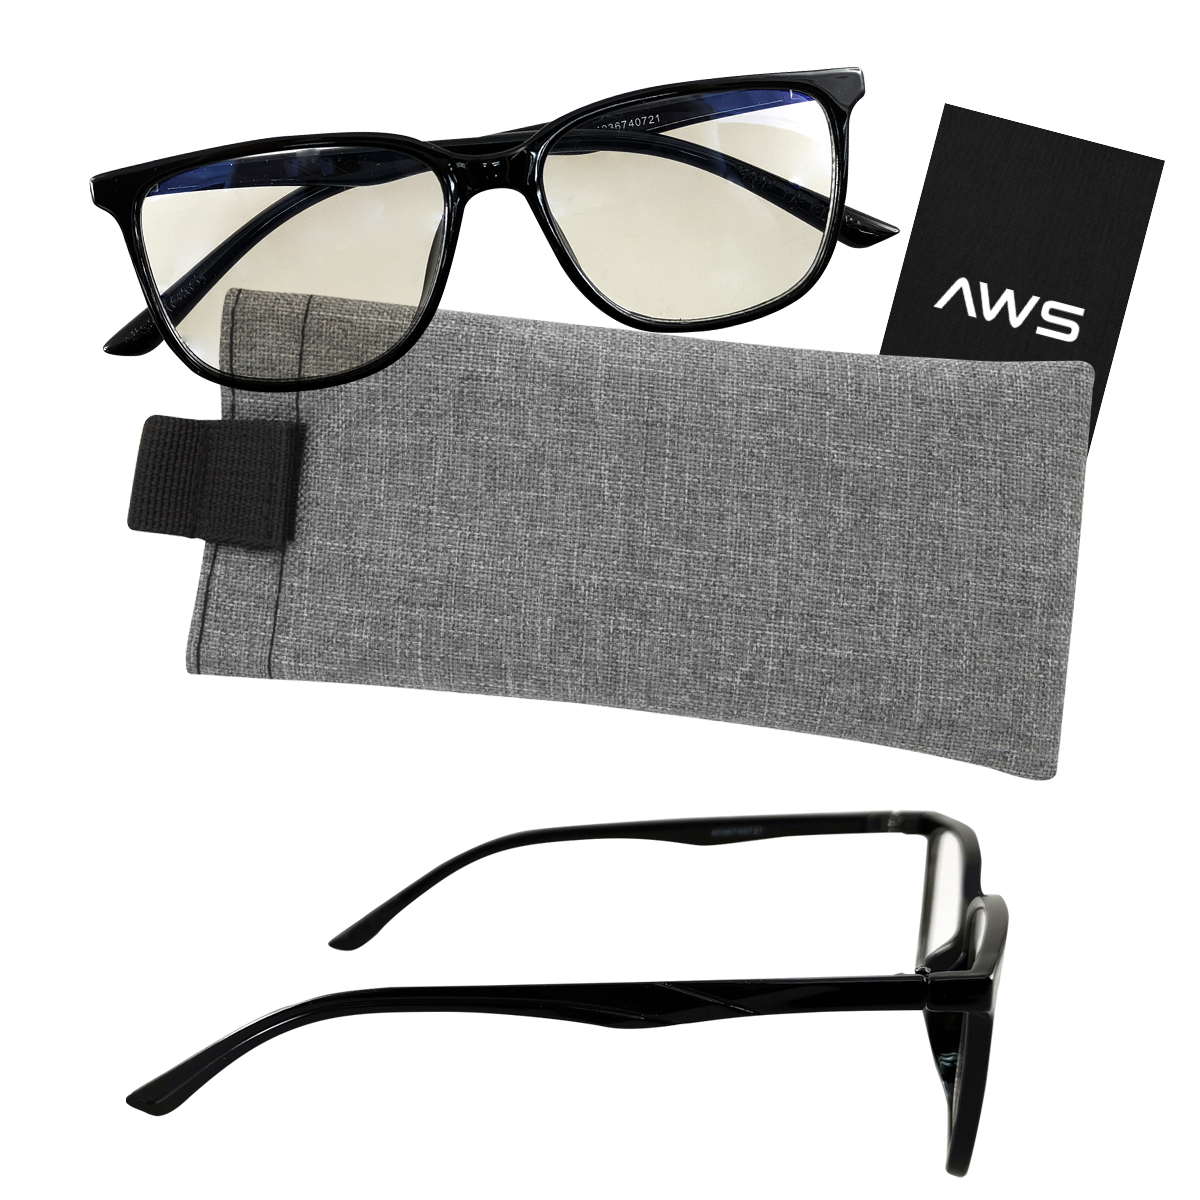 Black Sunglasses with Gray Pouch AWS Blue Light Blocking Glasses With Pouch